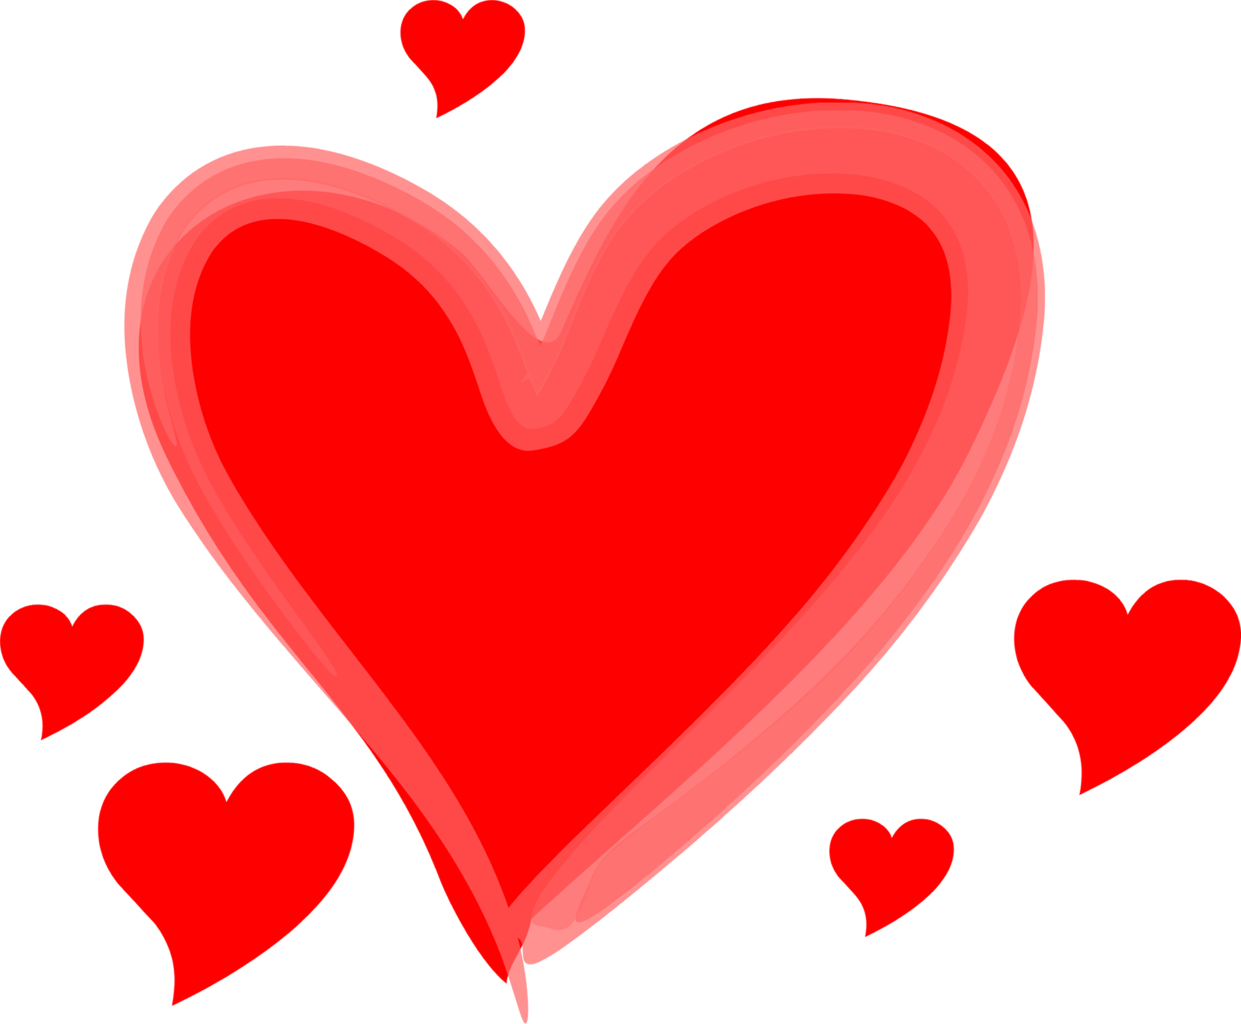 Love Clipart - PNG Image #72